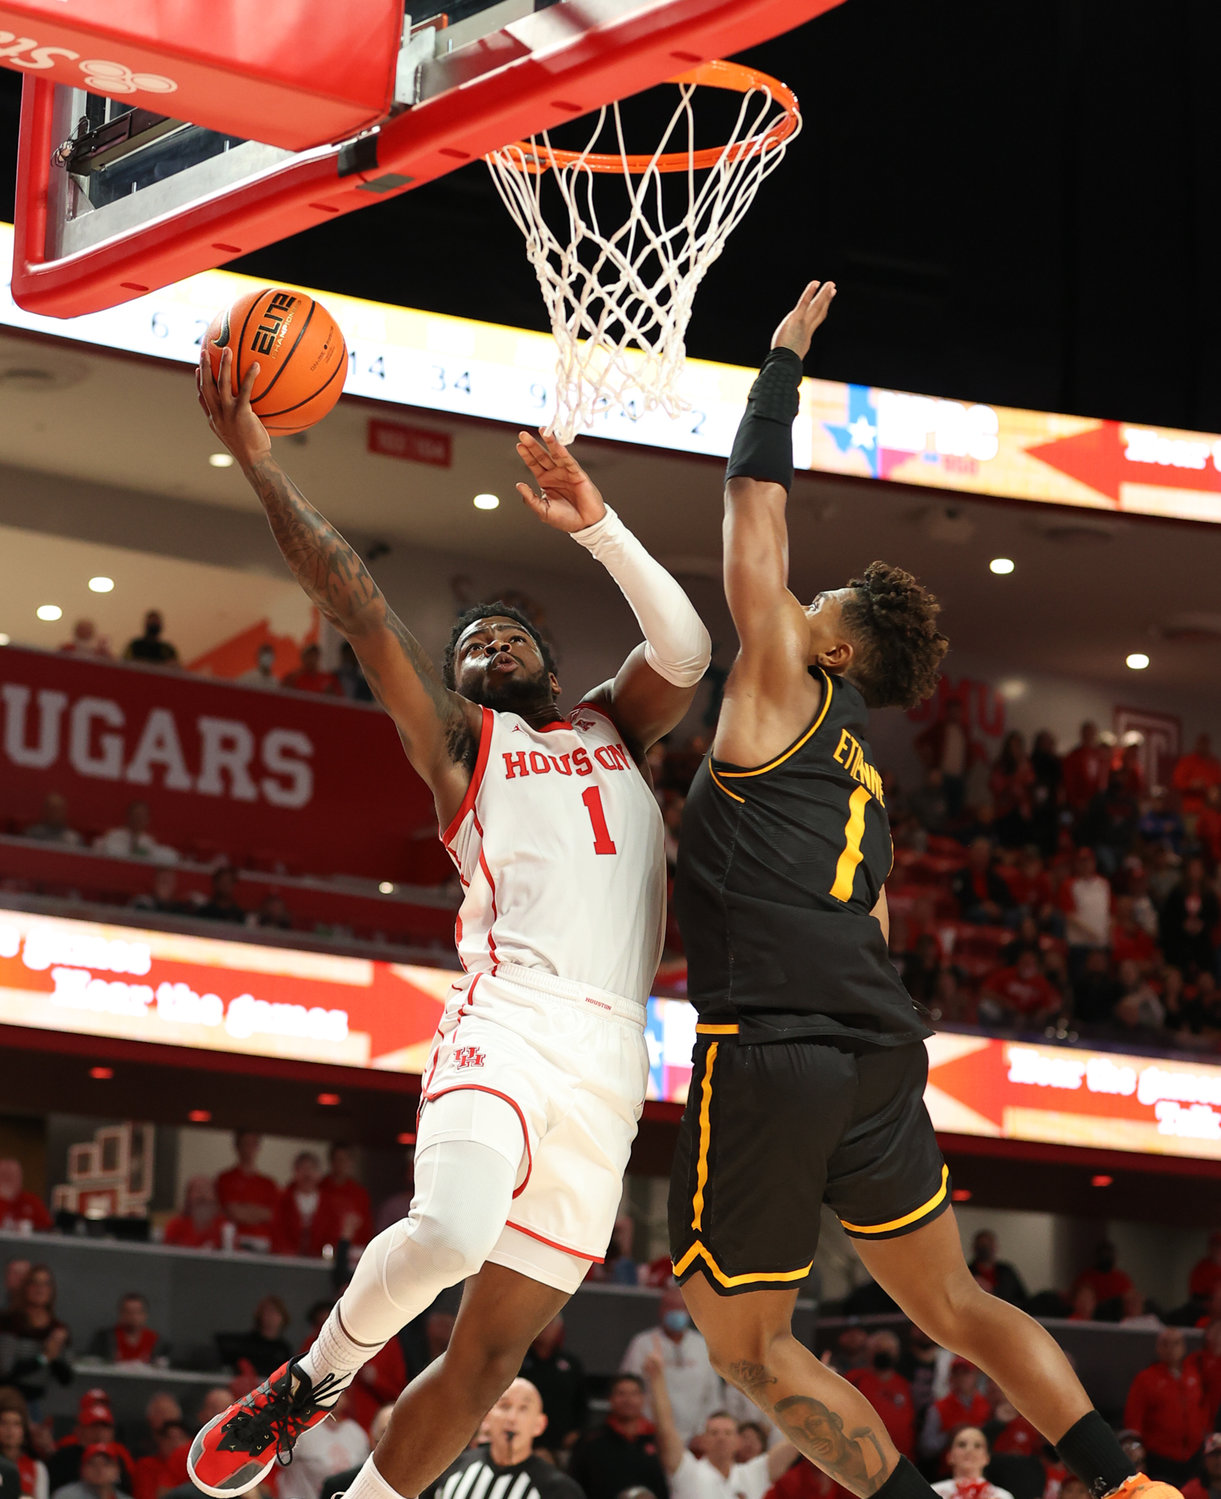 Houston Cougars guard Jamal Shead (1) goes to the basket against Wichita State Shockers guard Tyson Etienne (1) during an NCAA men’s basketball game on Jan. 8, 2022 in Houston, Texas.